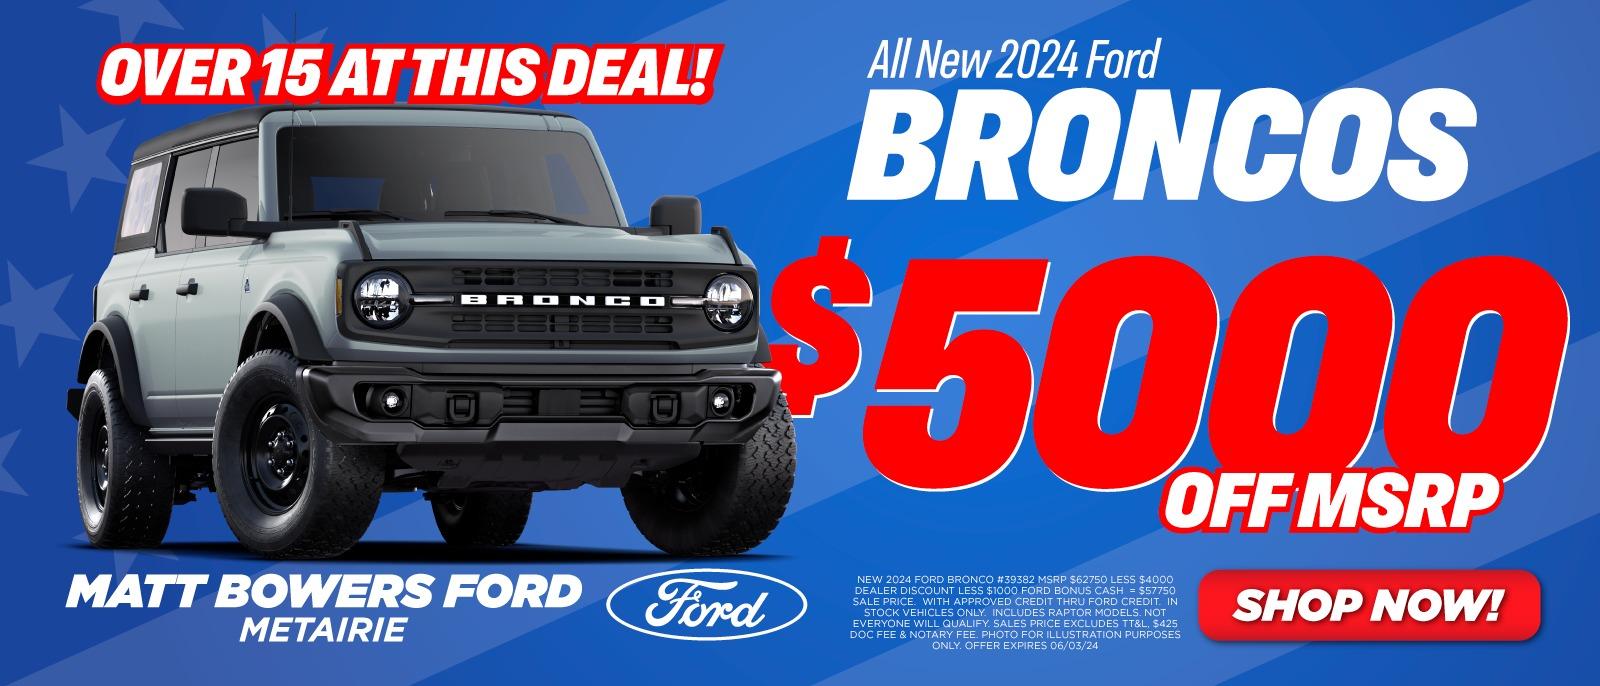 2024 Ford Bronco Deal